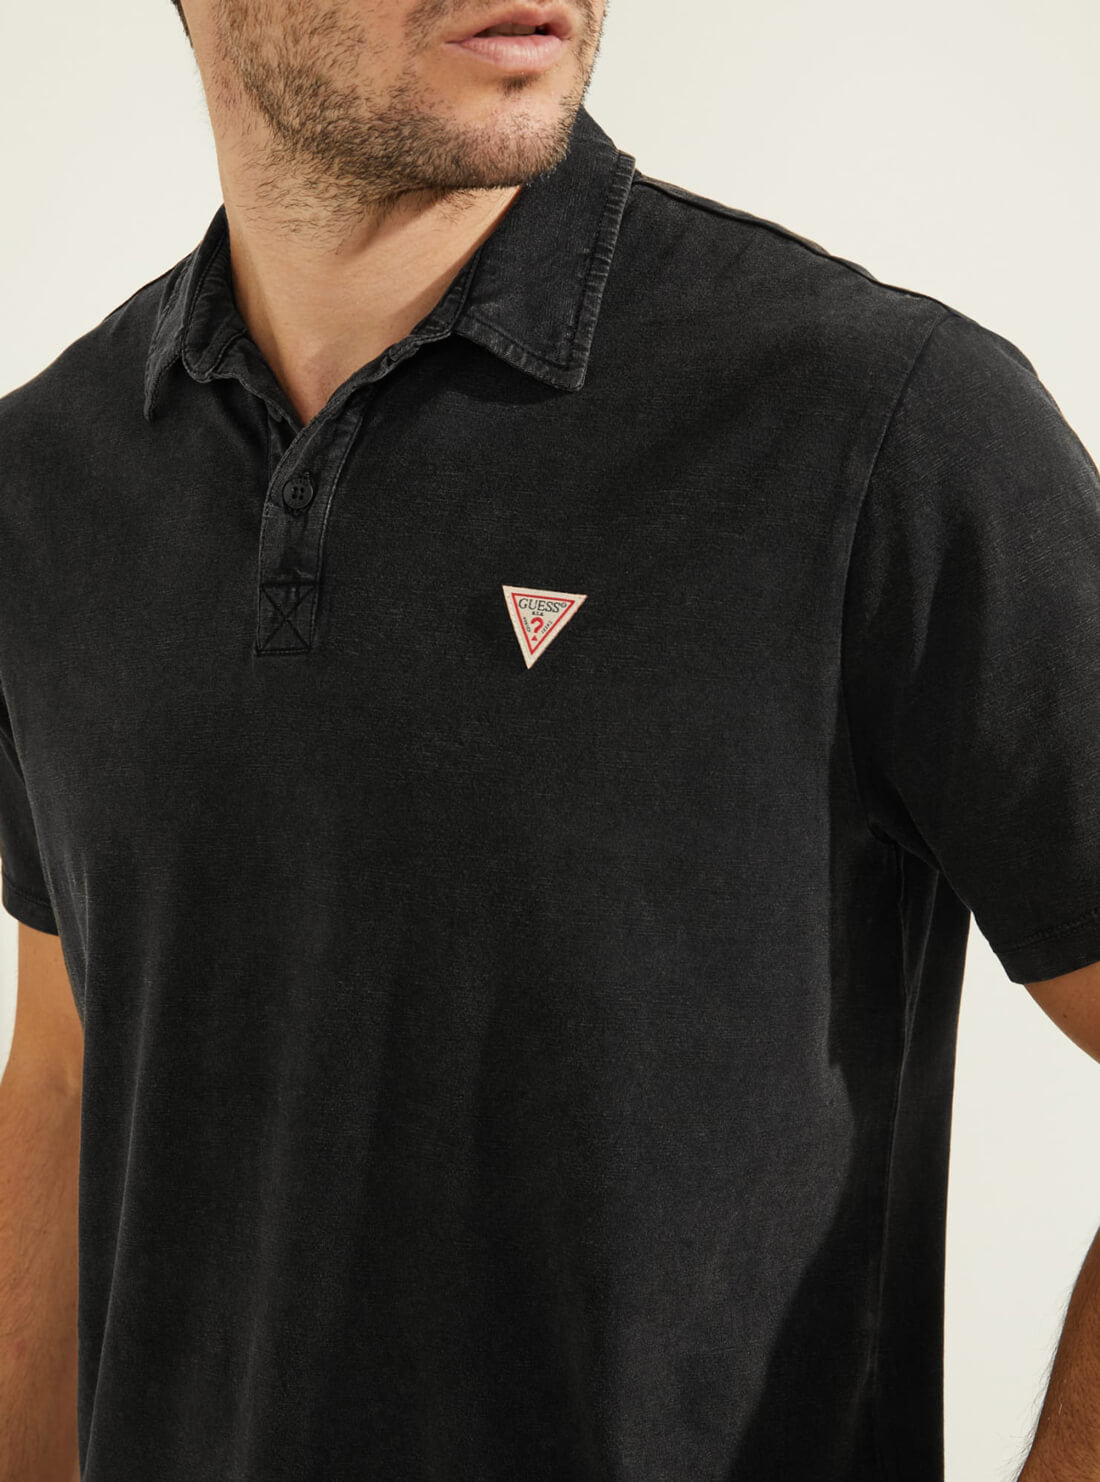 GUESS Mens Black Eli Jersey Washed Polo T-Shirt M0YP68R9Y10 Detail View